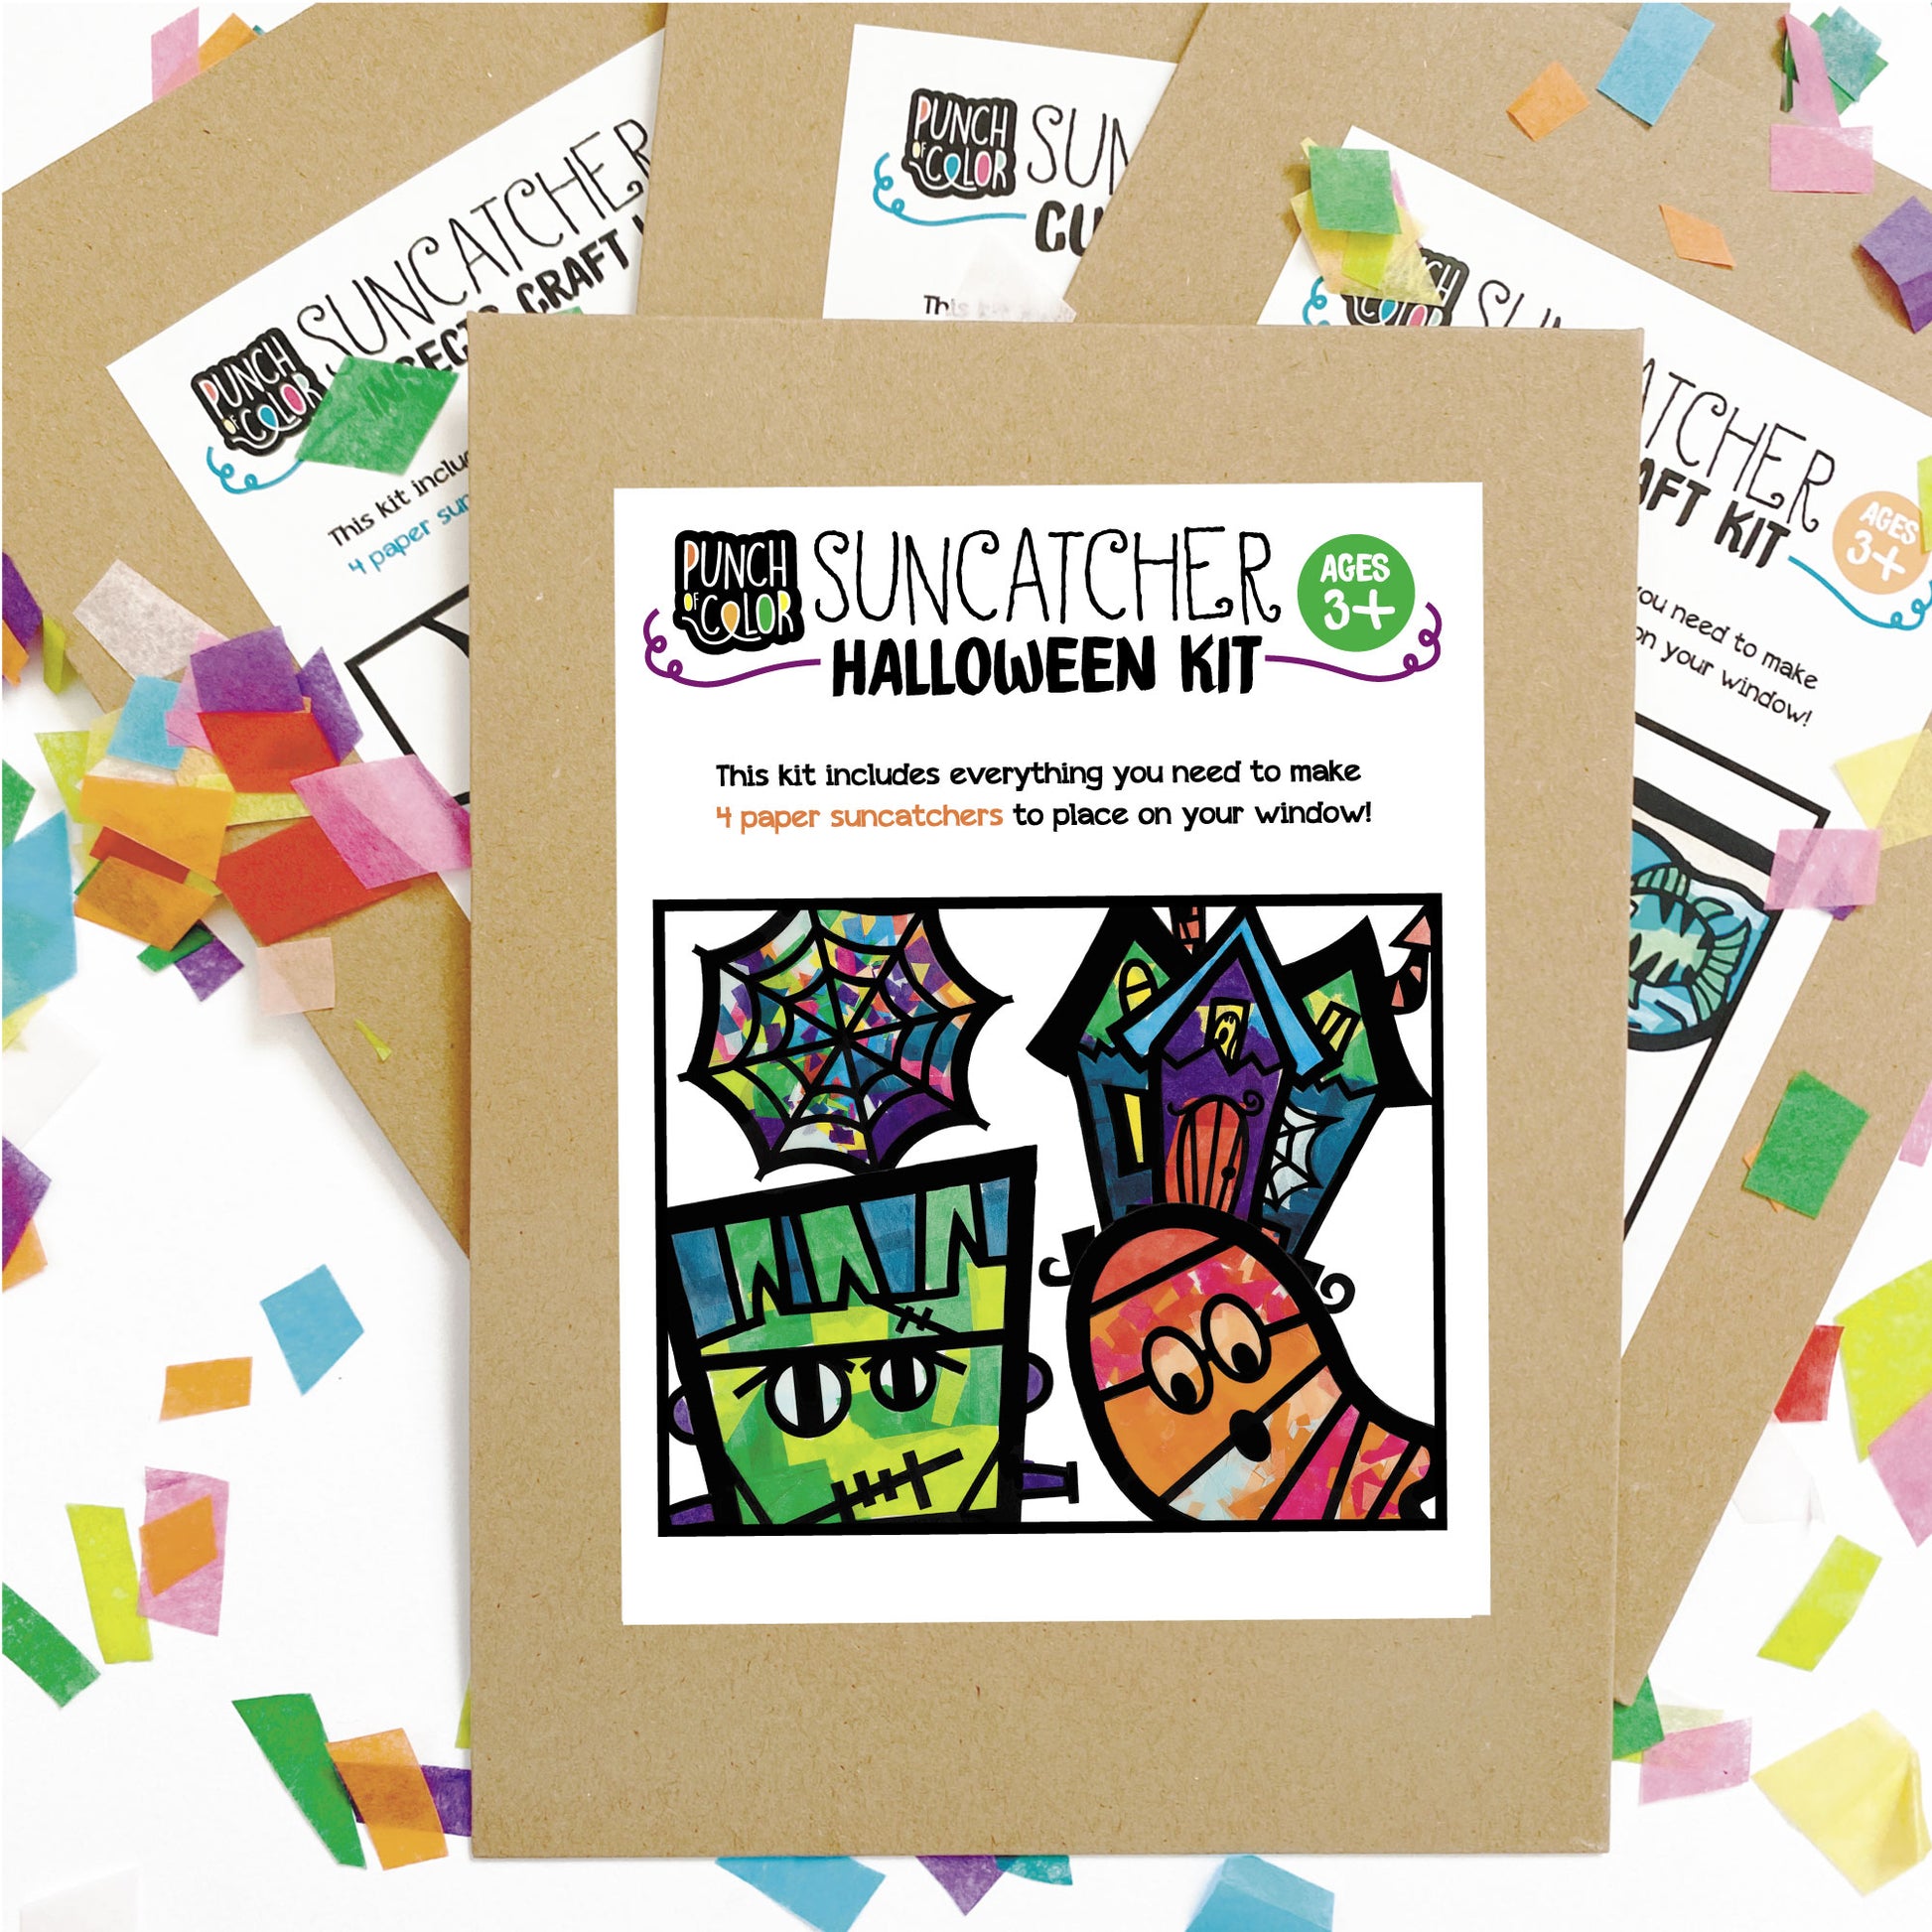 Halloween suncatcher arts and crafts kit, a mess-free paper based activity for toddlers and kids. Make a spider web, haunted house, ghost and Frankenstein